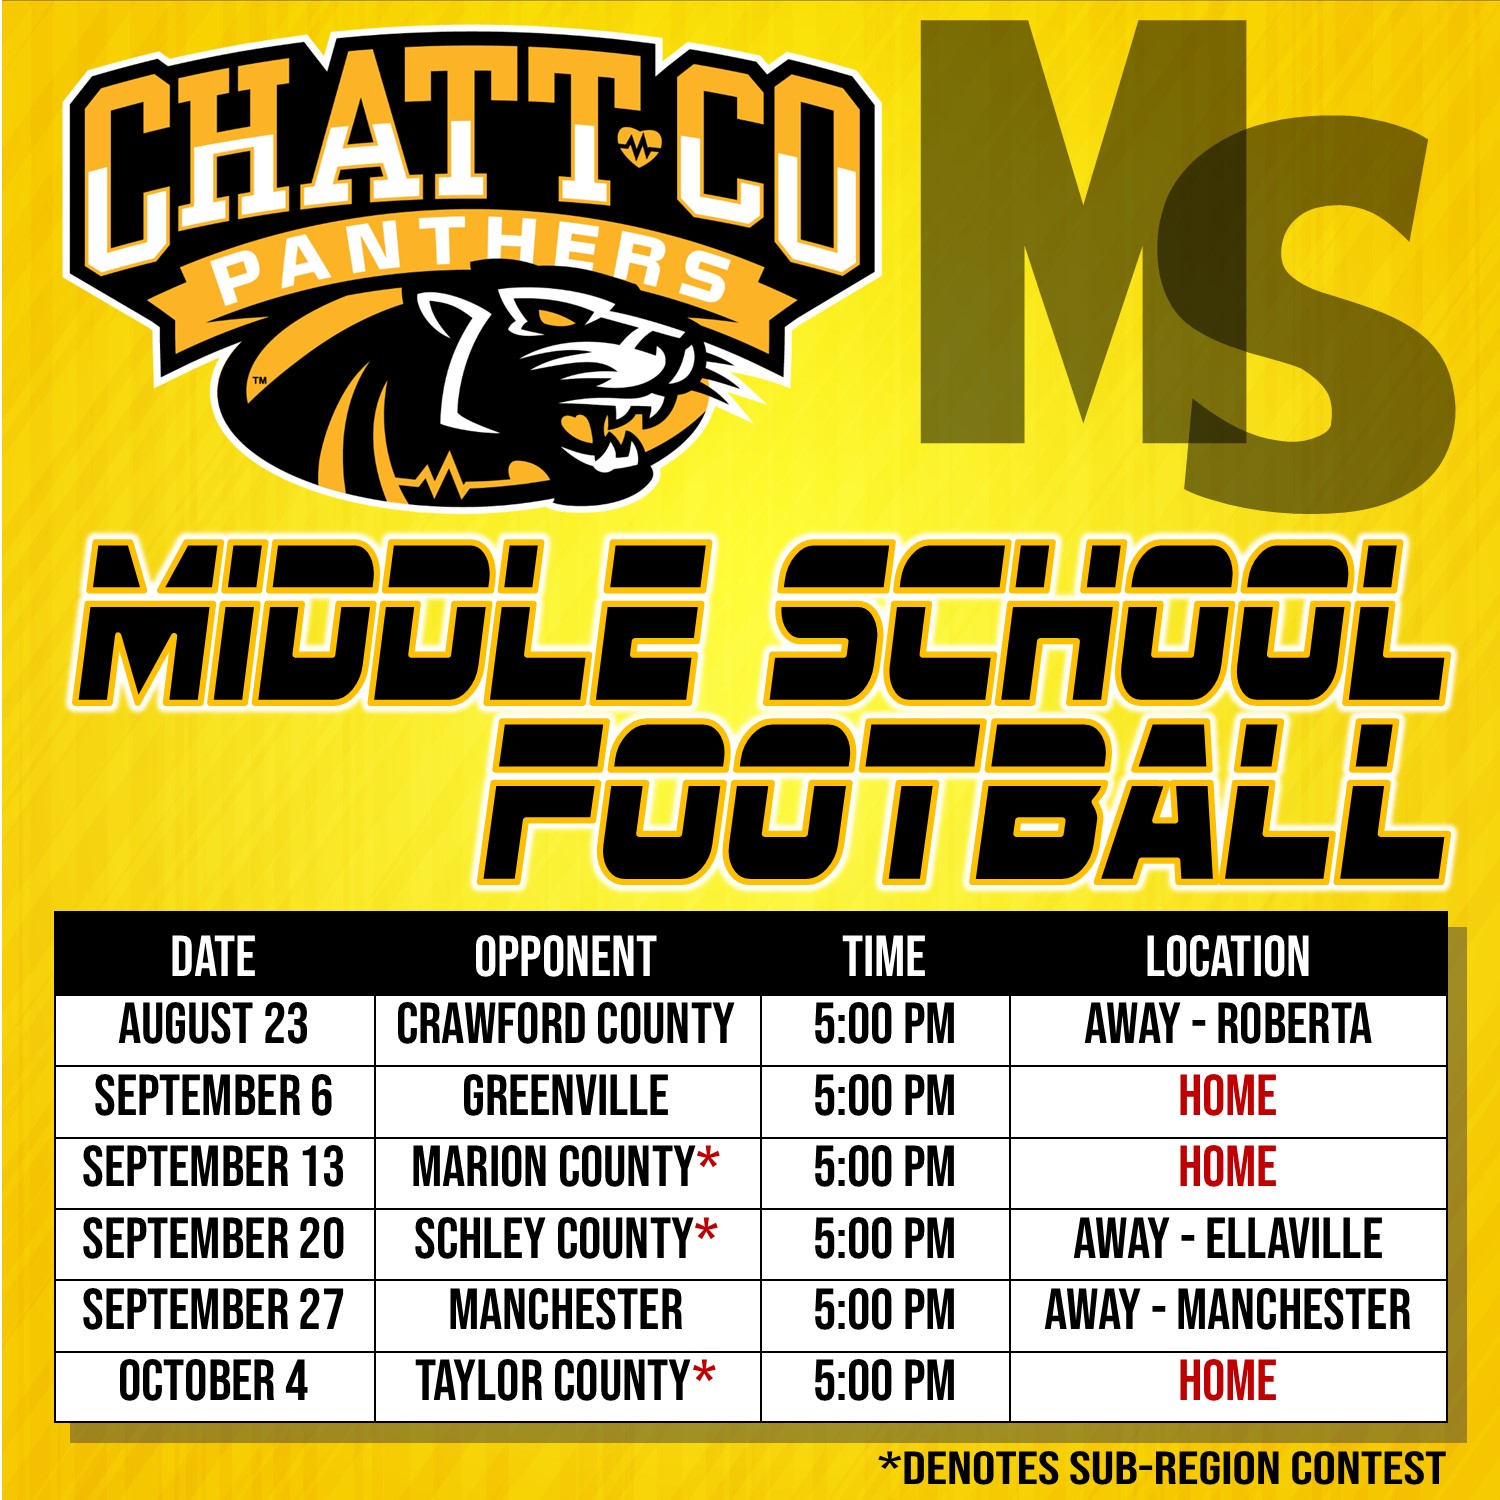 ChattCo Panthers MS Football 2023 AUG 23  Crawford County  5:00PM  Away - Roberta SEPT 6  Greenville  5:00PM Home SEPT 13  Marion County* 5:00 PM Home SEPT 20 Schley County* 5:00 PM Away- Ellaville SEPT 27  Manchester  5:00 PM Away - Manchester OCT 4 Taylor County* 5:00 PM  Home *Denotes Sub-region contest